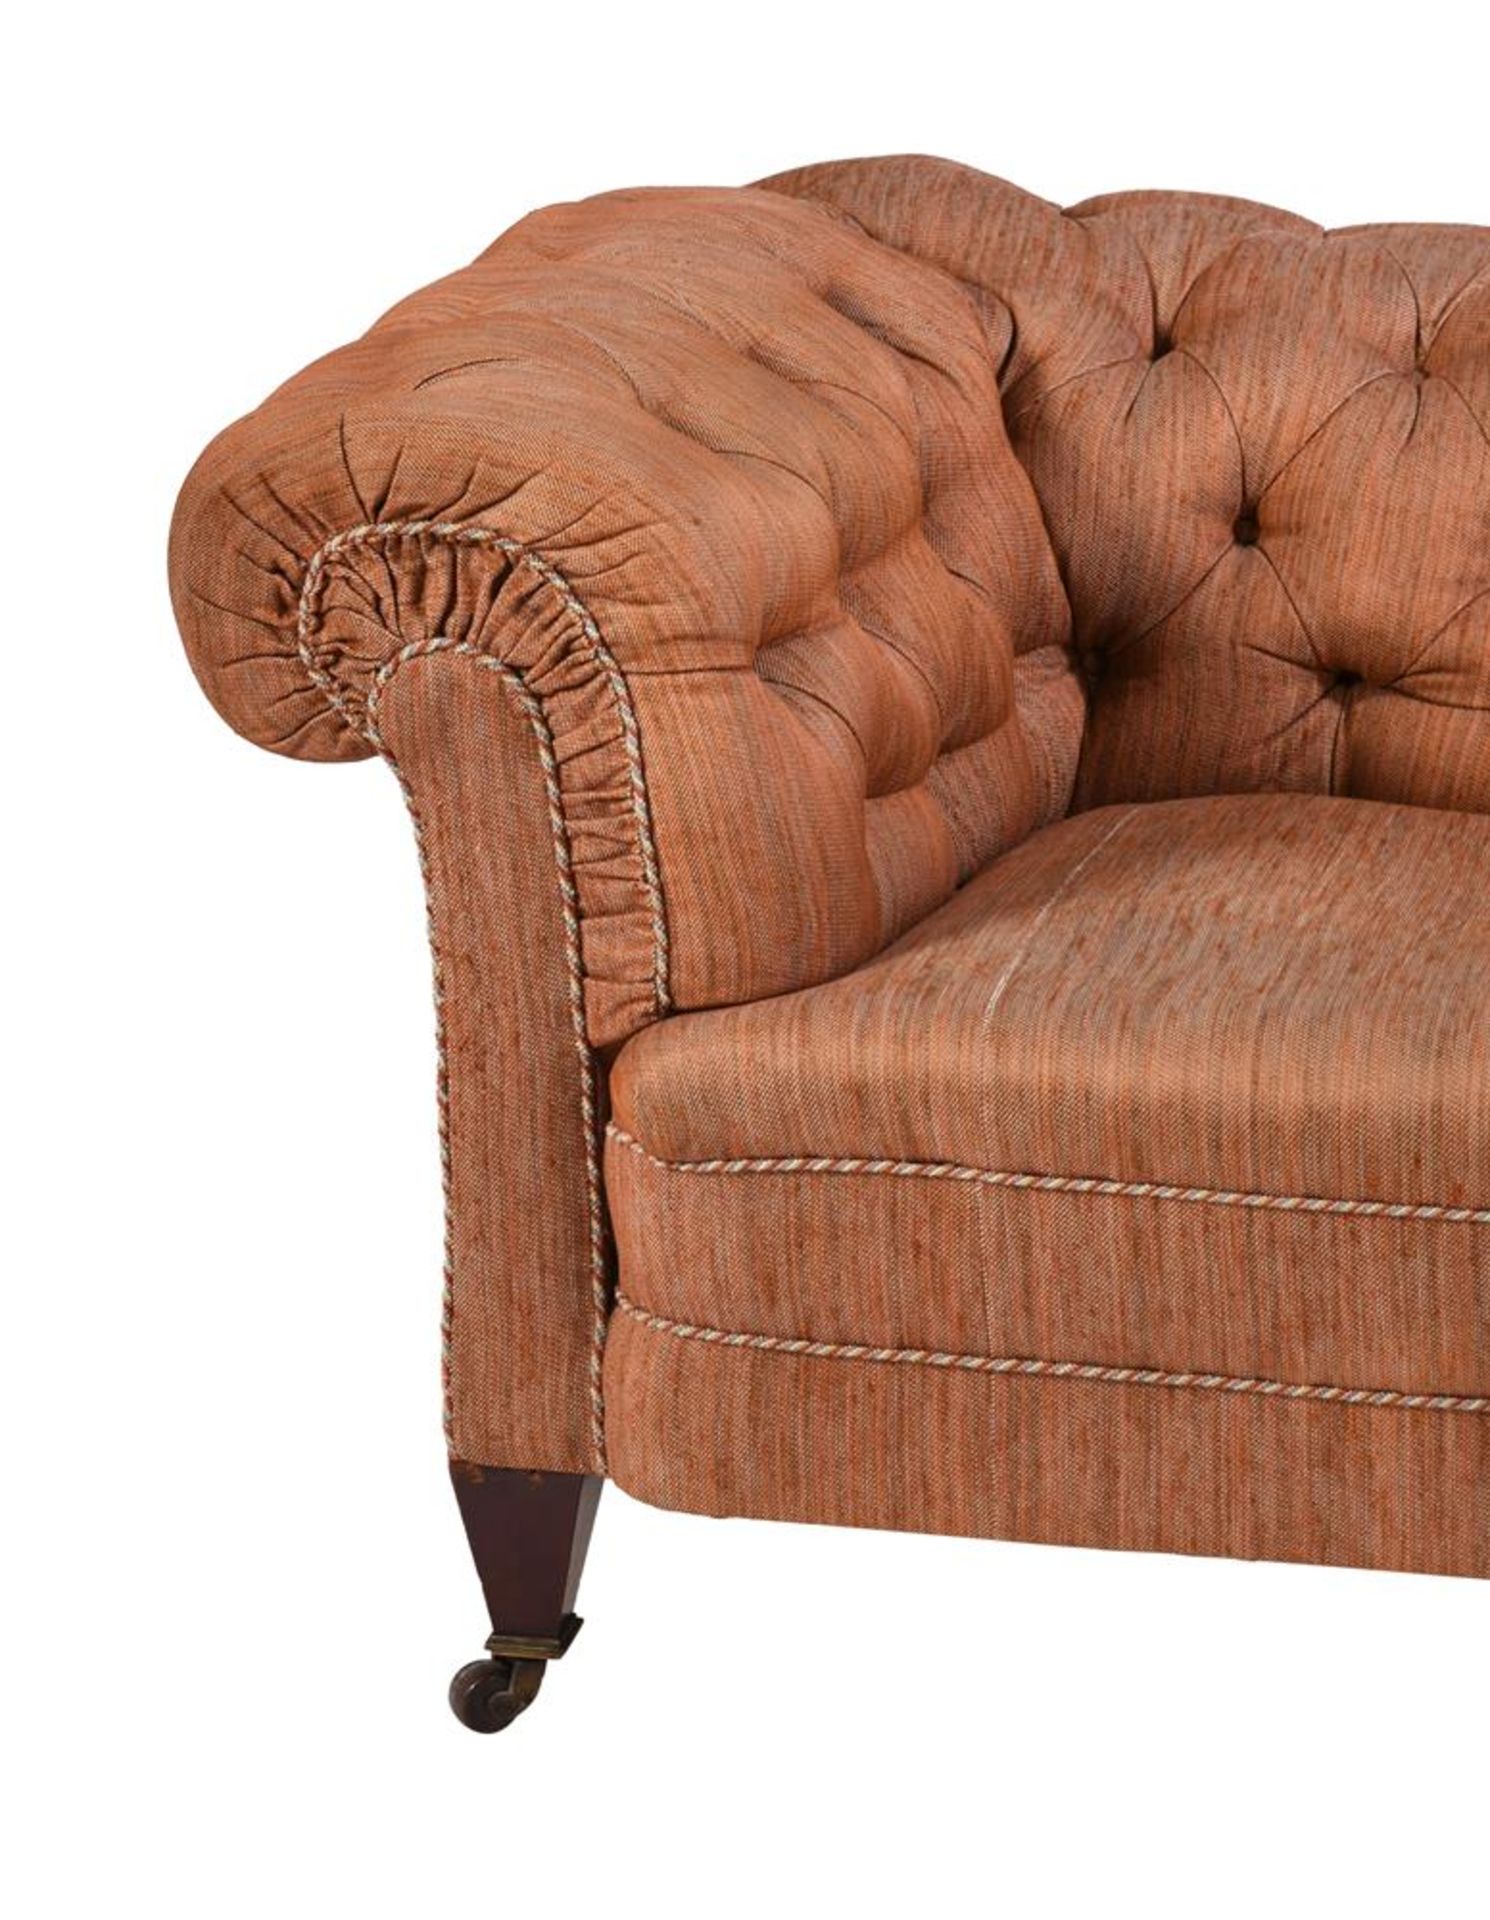 A LATE VICTORIAN MAHOGANY AND BUTTON UPHOLSTERED SOFA OF CHESTERFIELD TYPE, LATE 19TH CENTURY - Image 2 of 2